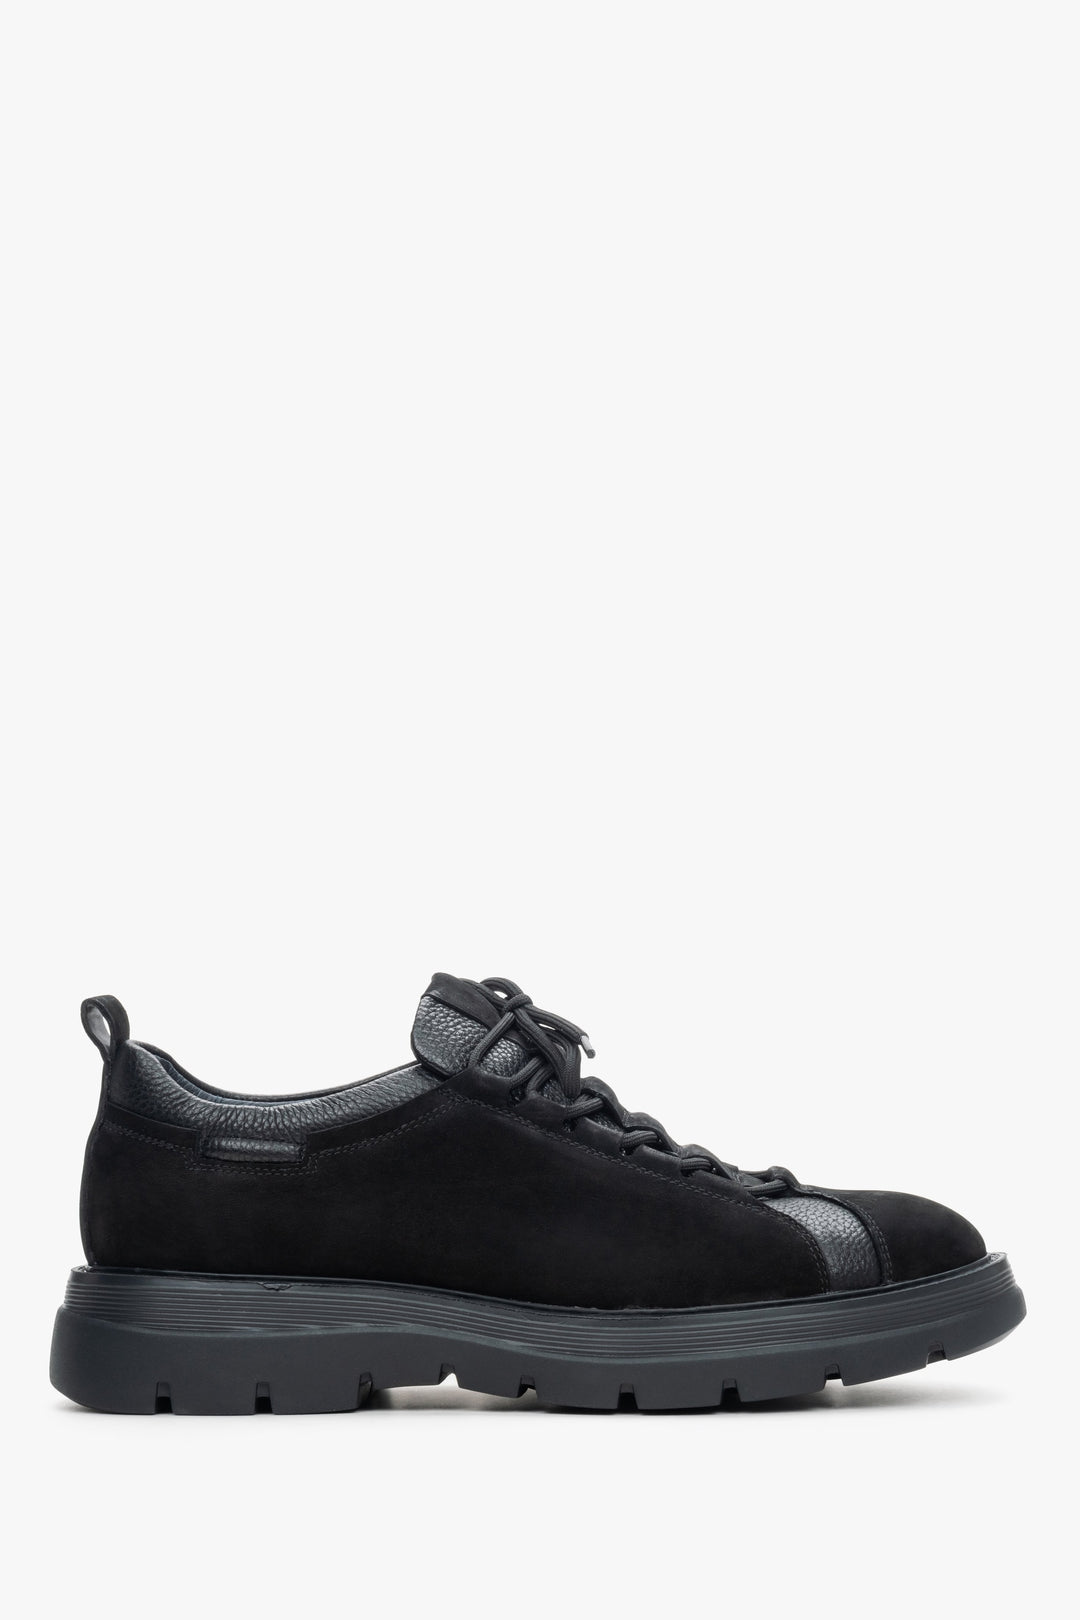 Men's Black Sneakers made of Nubuck and Genuine Leather with Elastic Lacing Estro ER00114194.